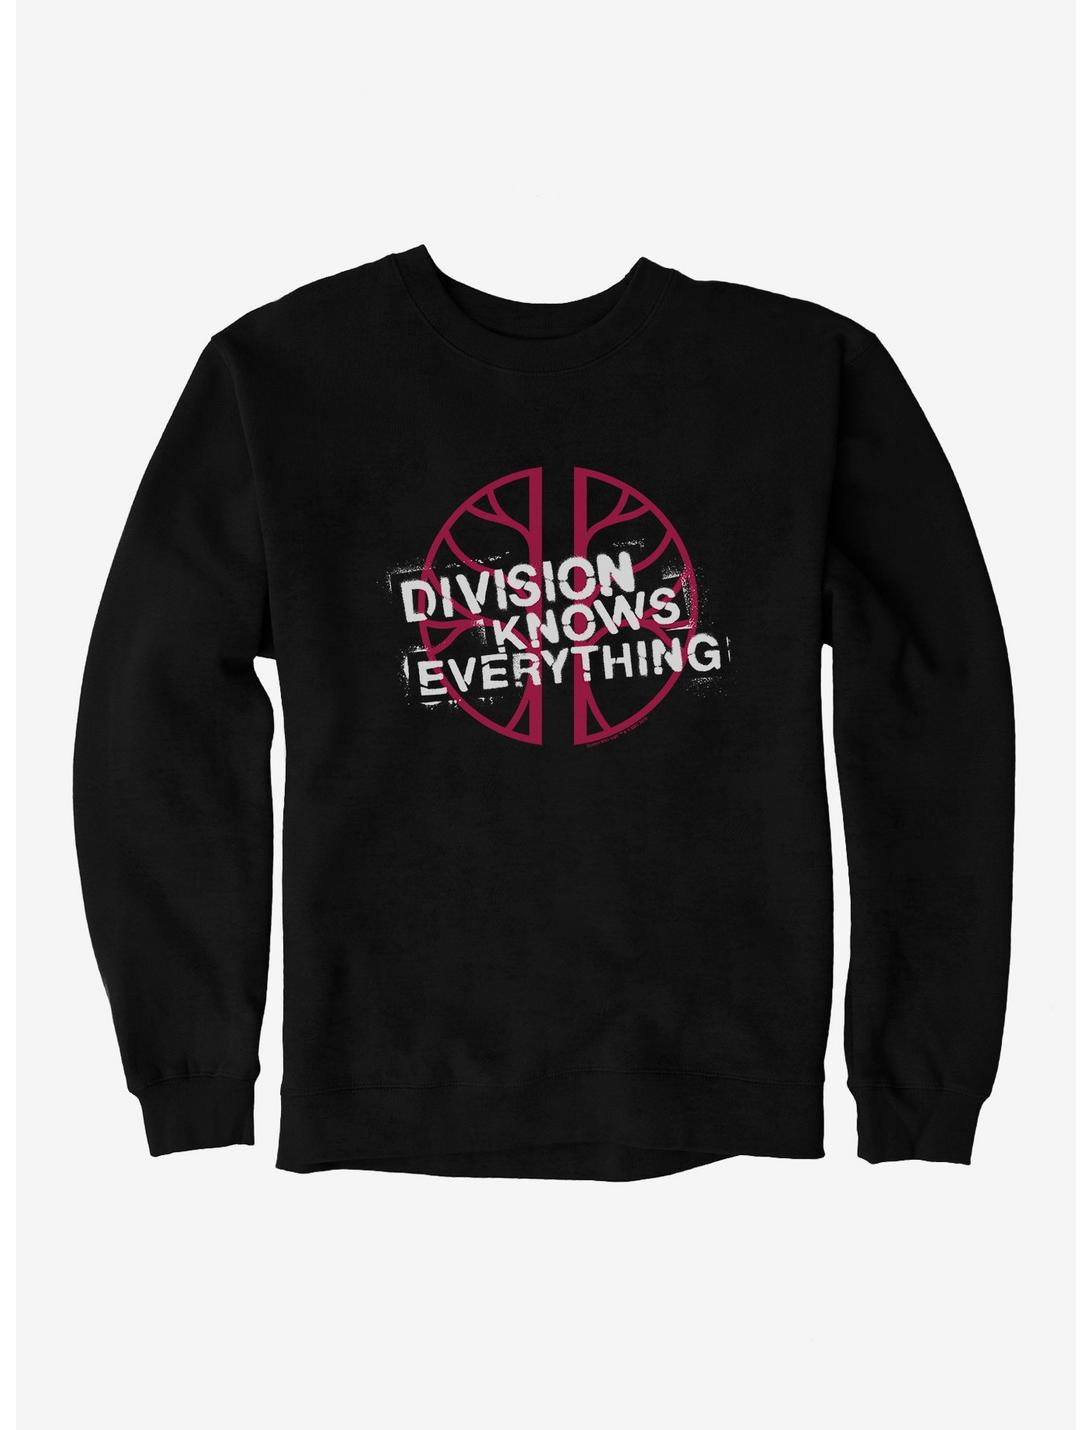 Doctor Who Division Knows Everything Sweatshirt, BLACK, hi-res